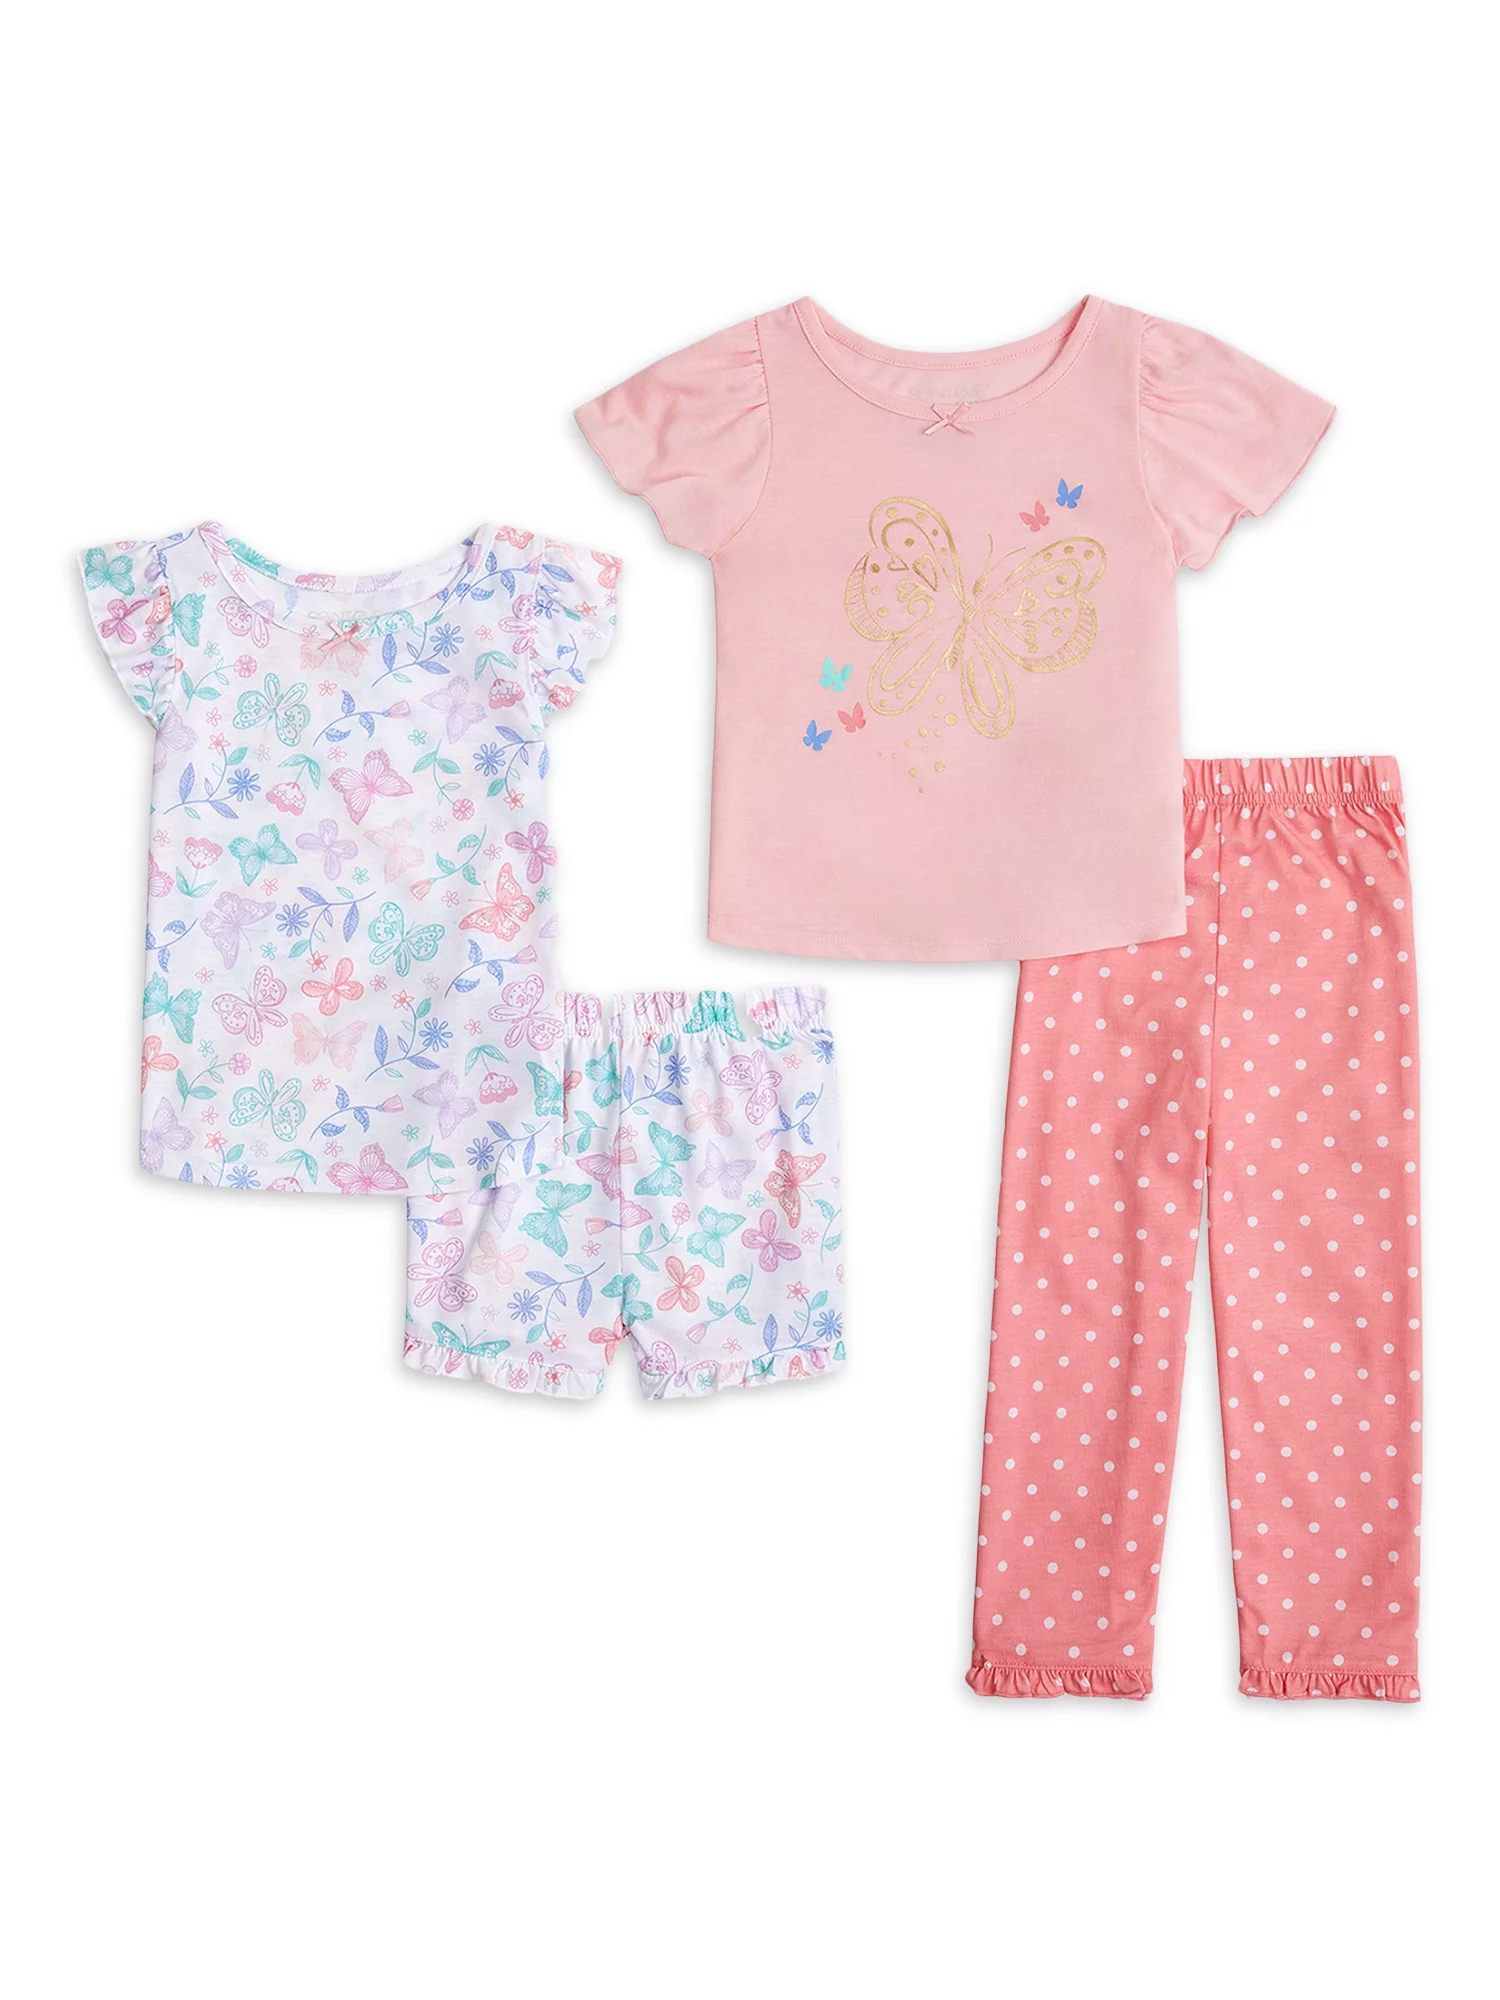 Saint Eve Baby and Toddler Girls Short Sleeve and Tank Mix and Match 4-piece PJ Set, Sizes 12M-5T